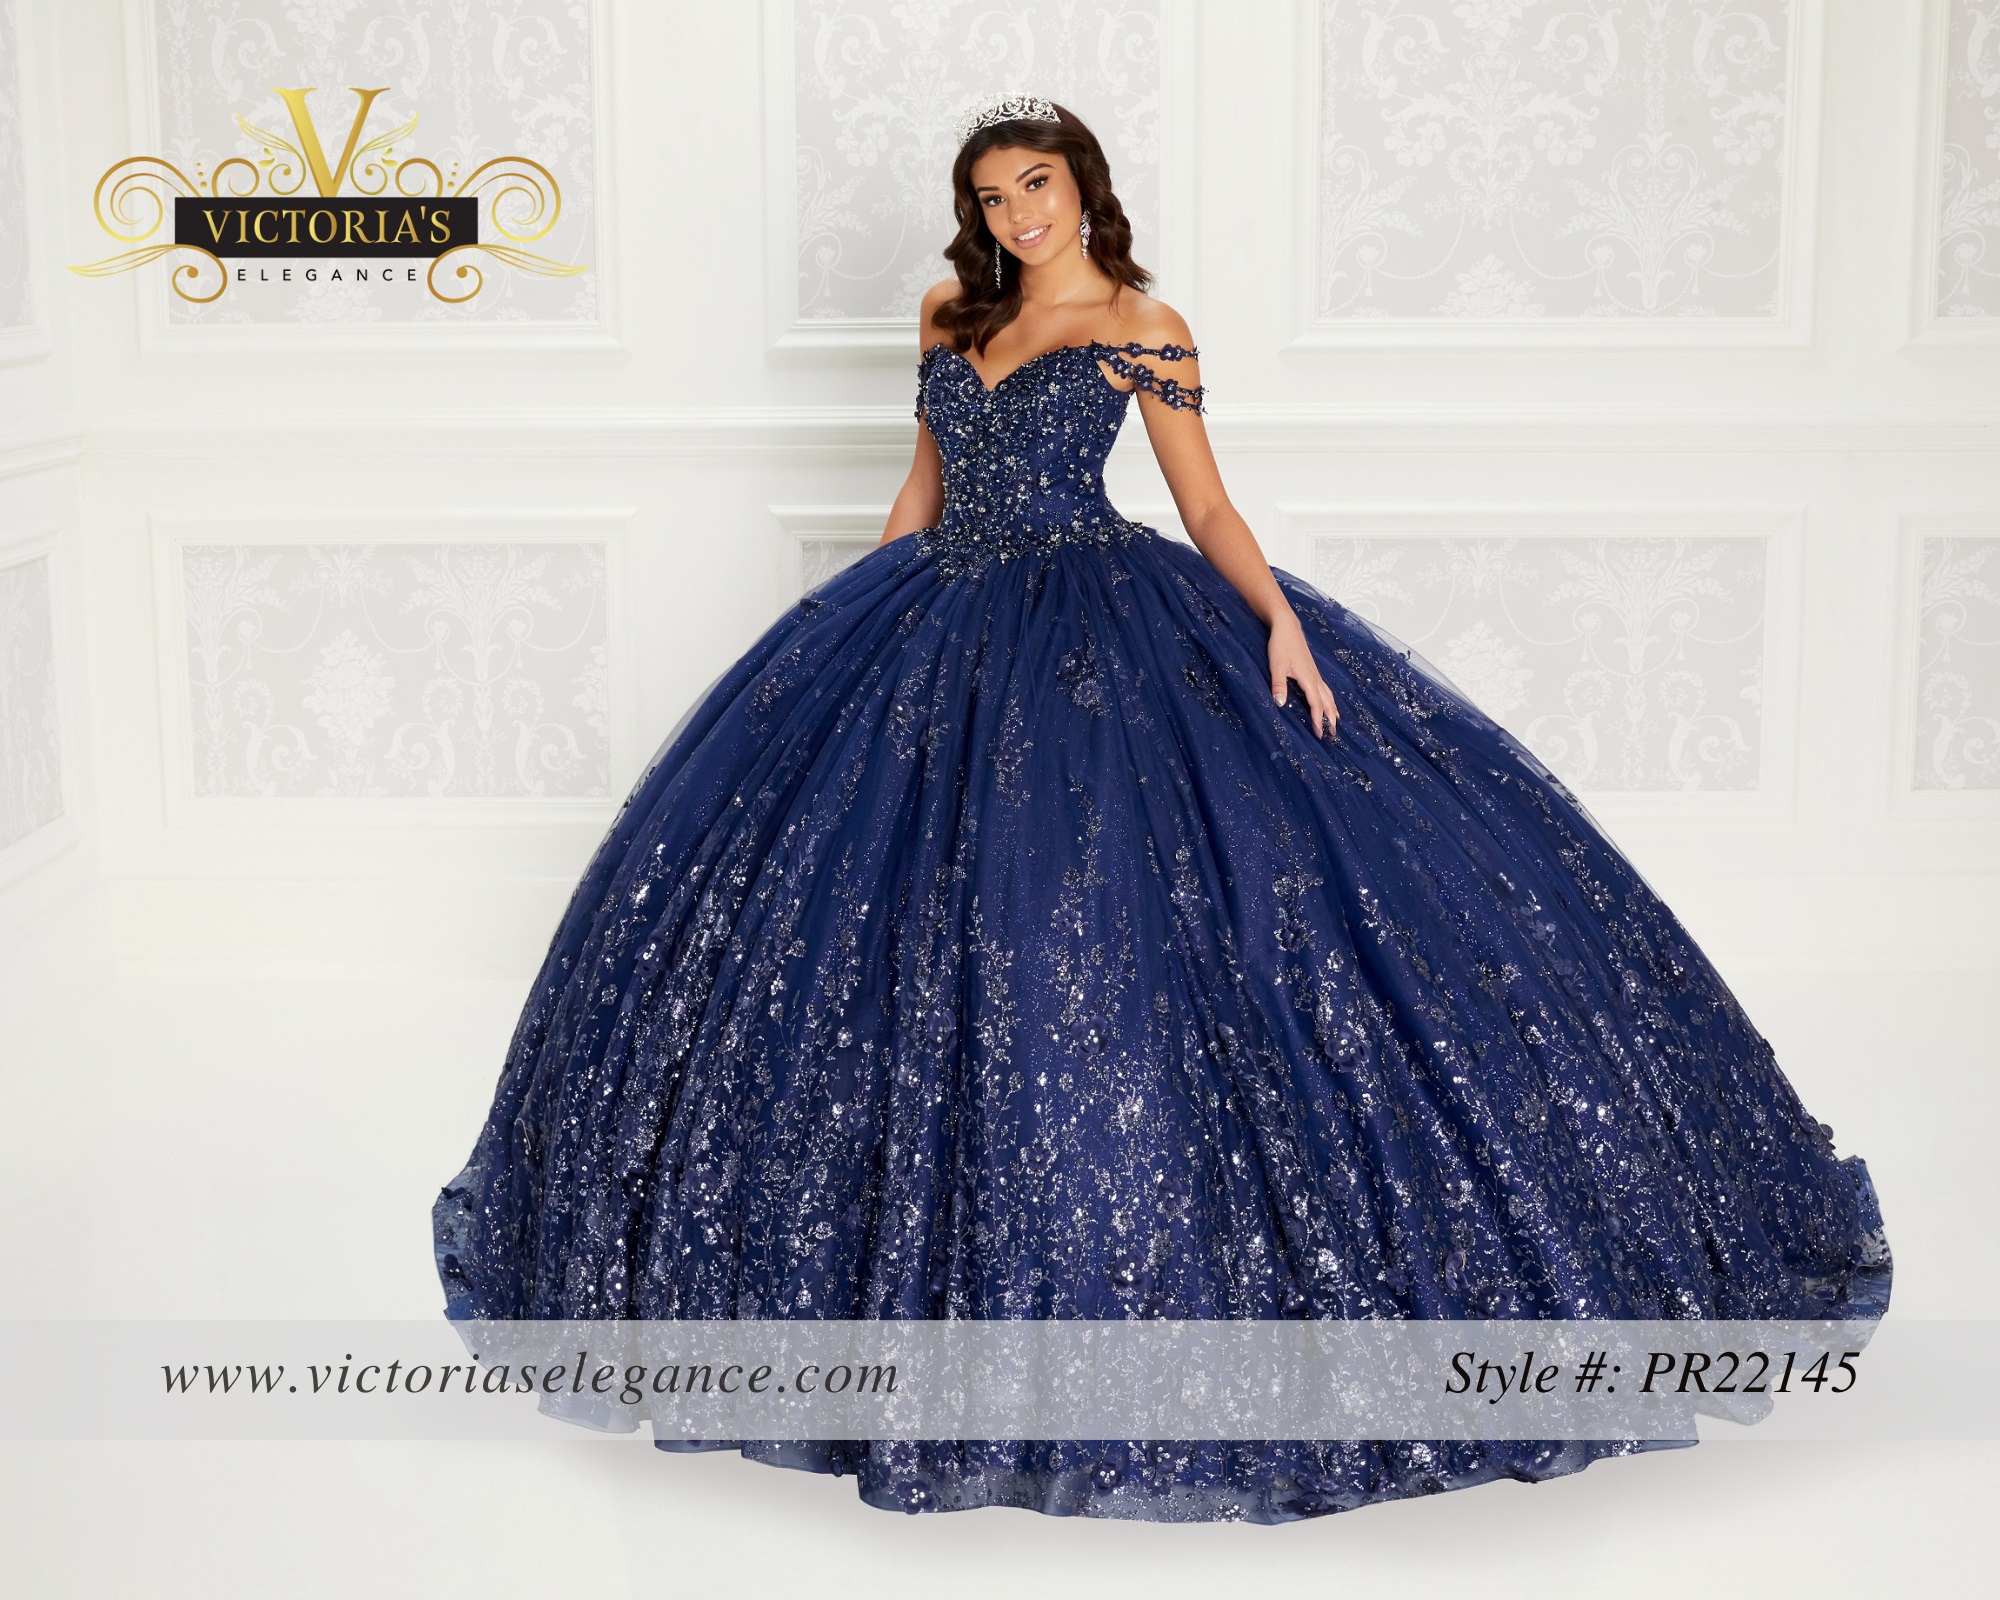 Princesa by Ariana Vara Floral Off Shoulder Glittered Gown